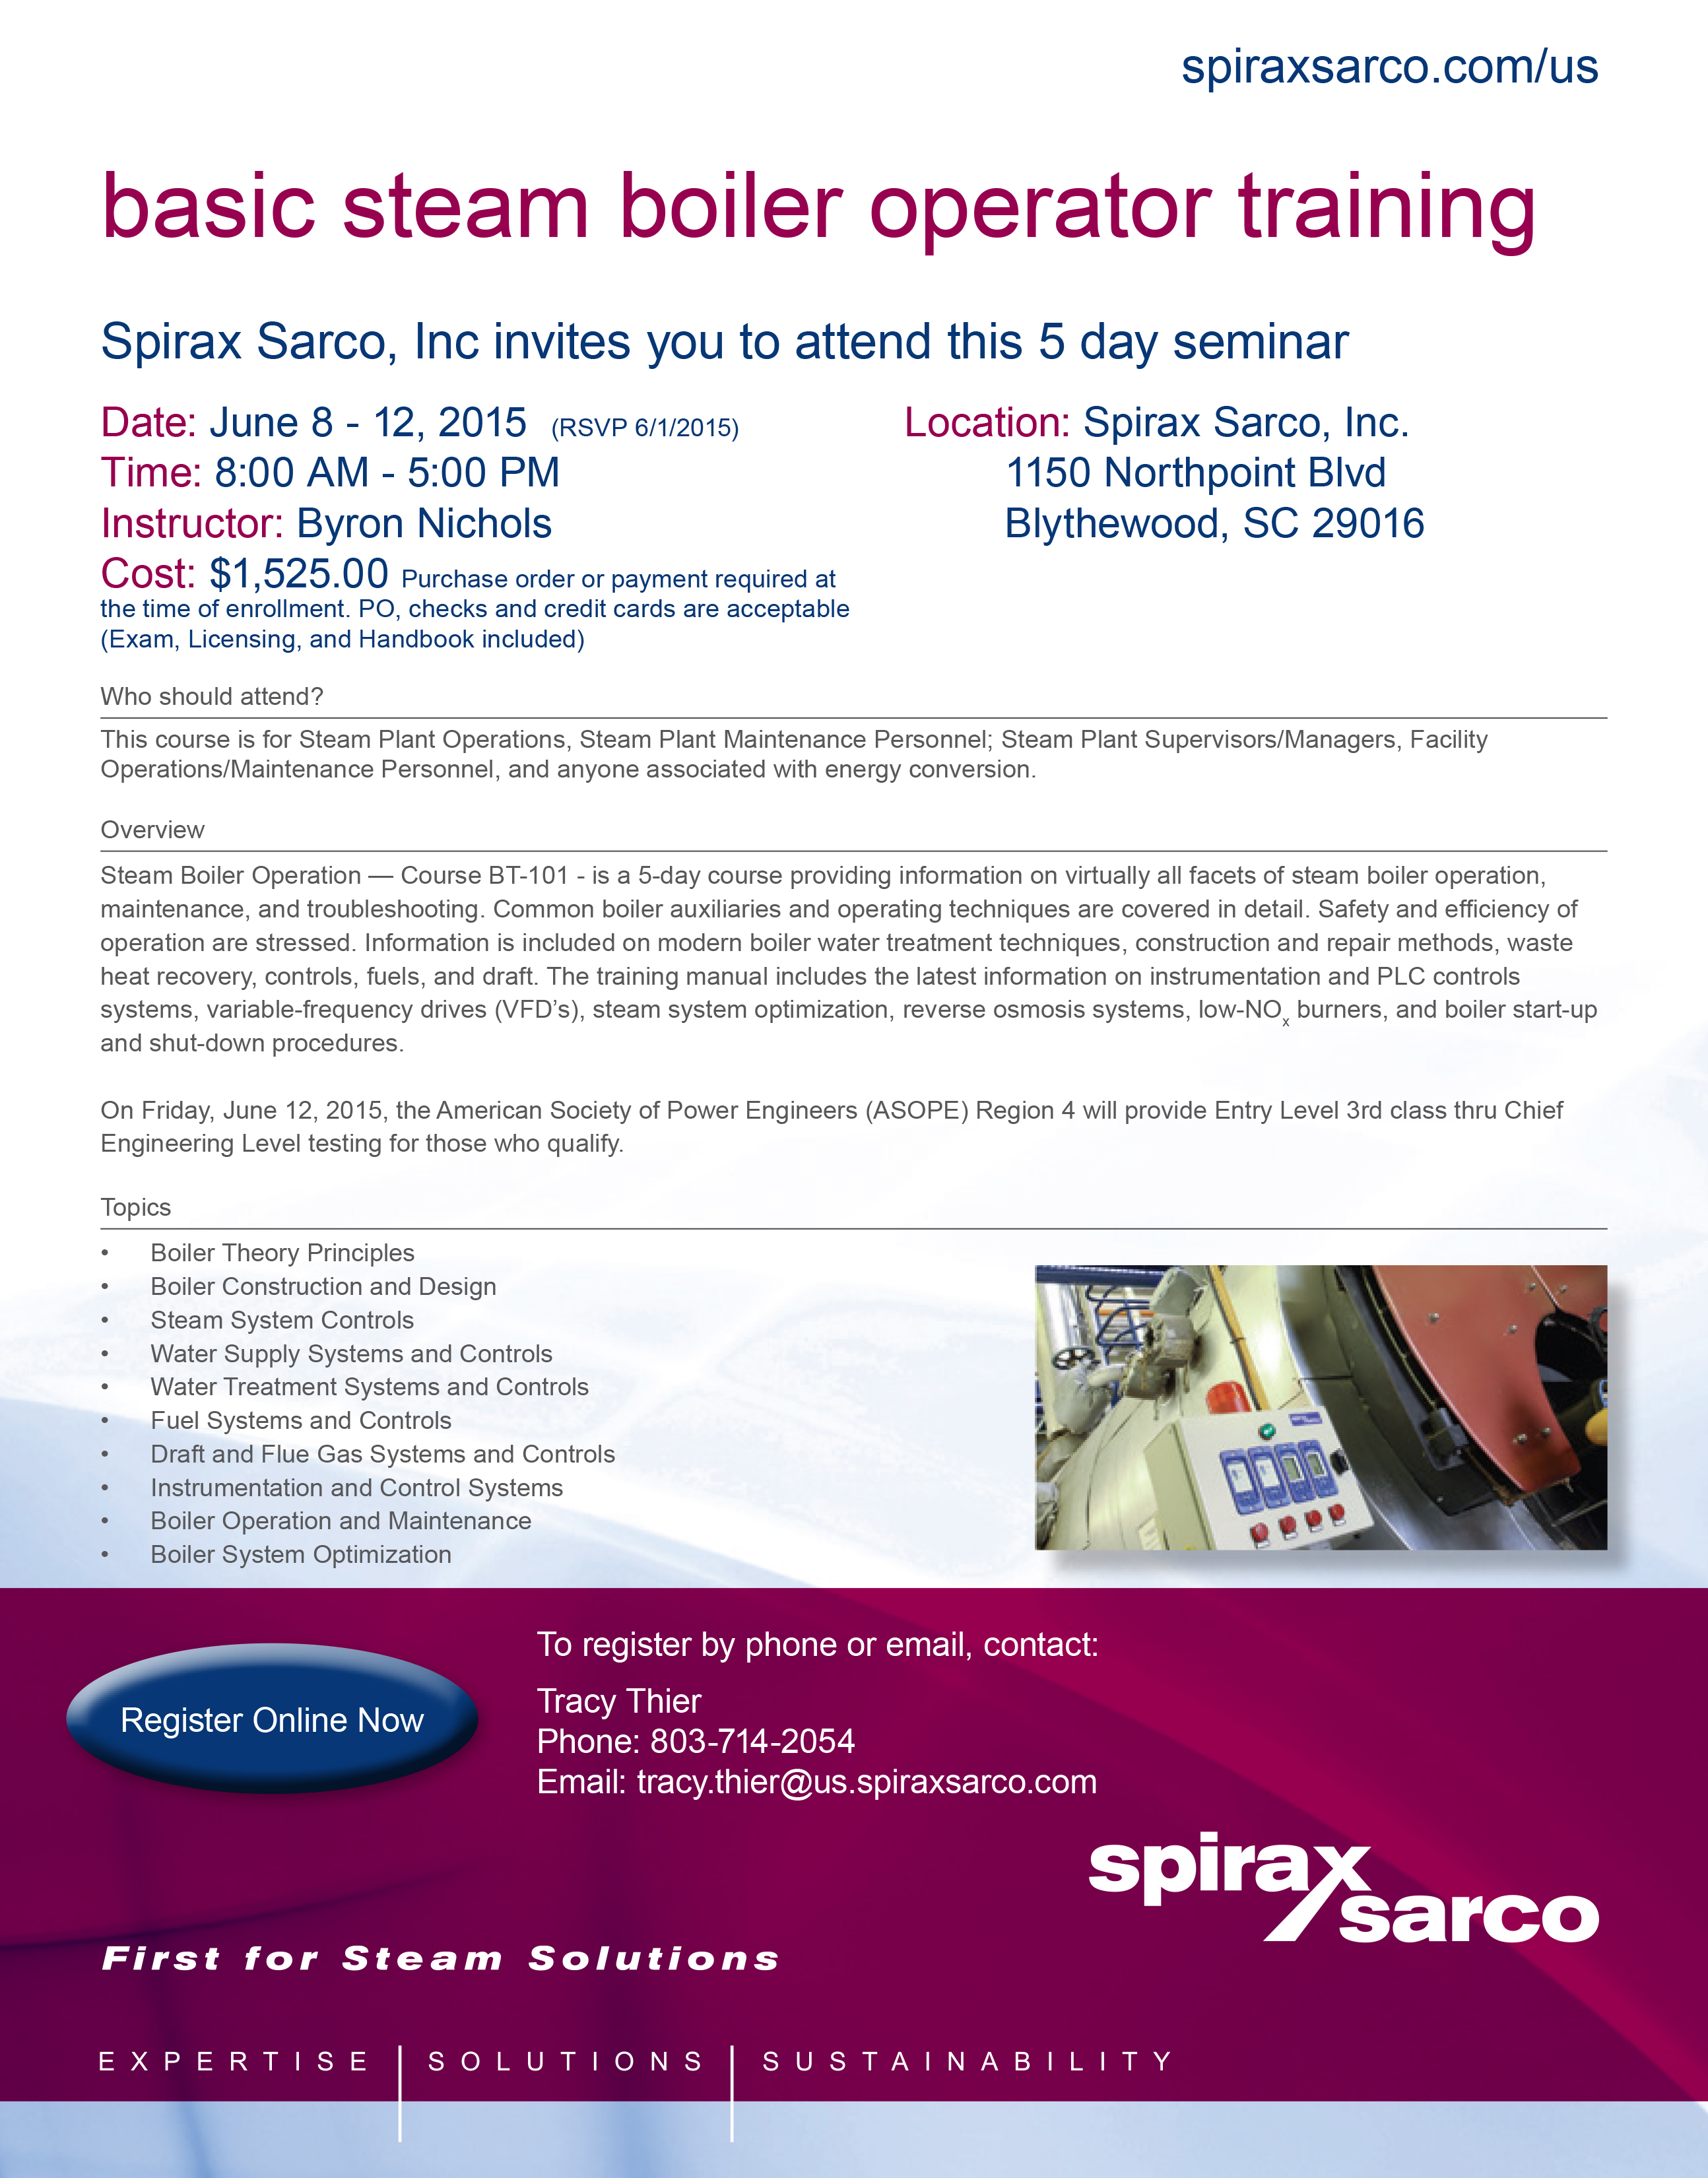 Spirax Sarco s Basic Steam Boiler Operator Training Course Coming to